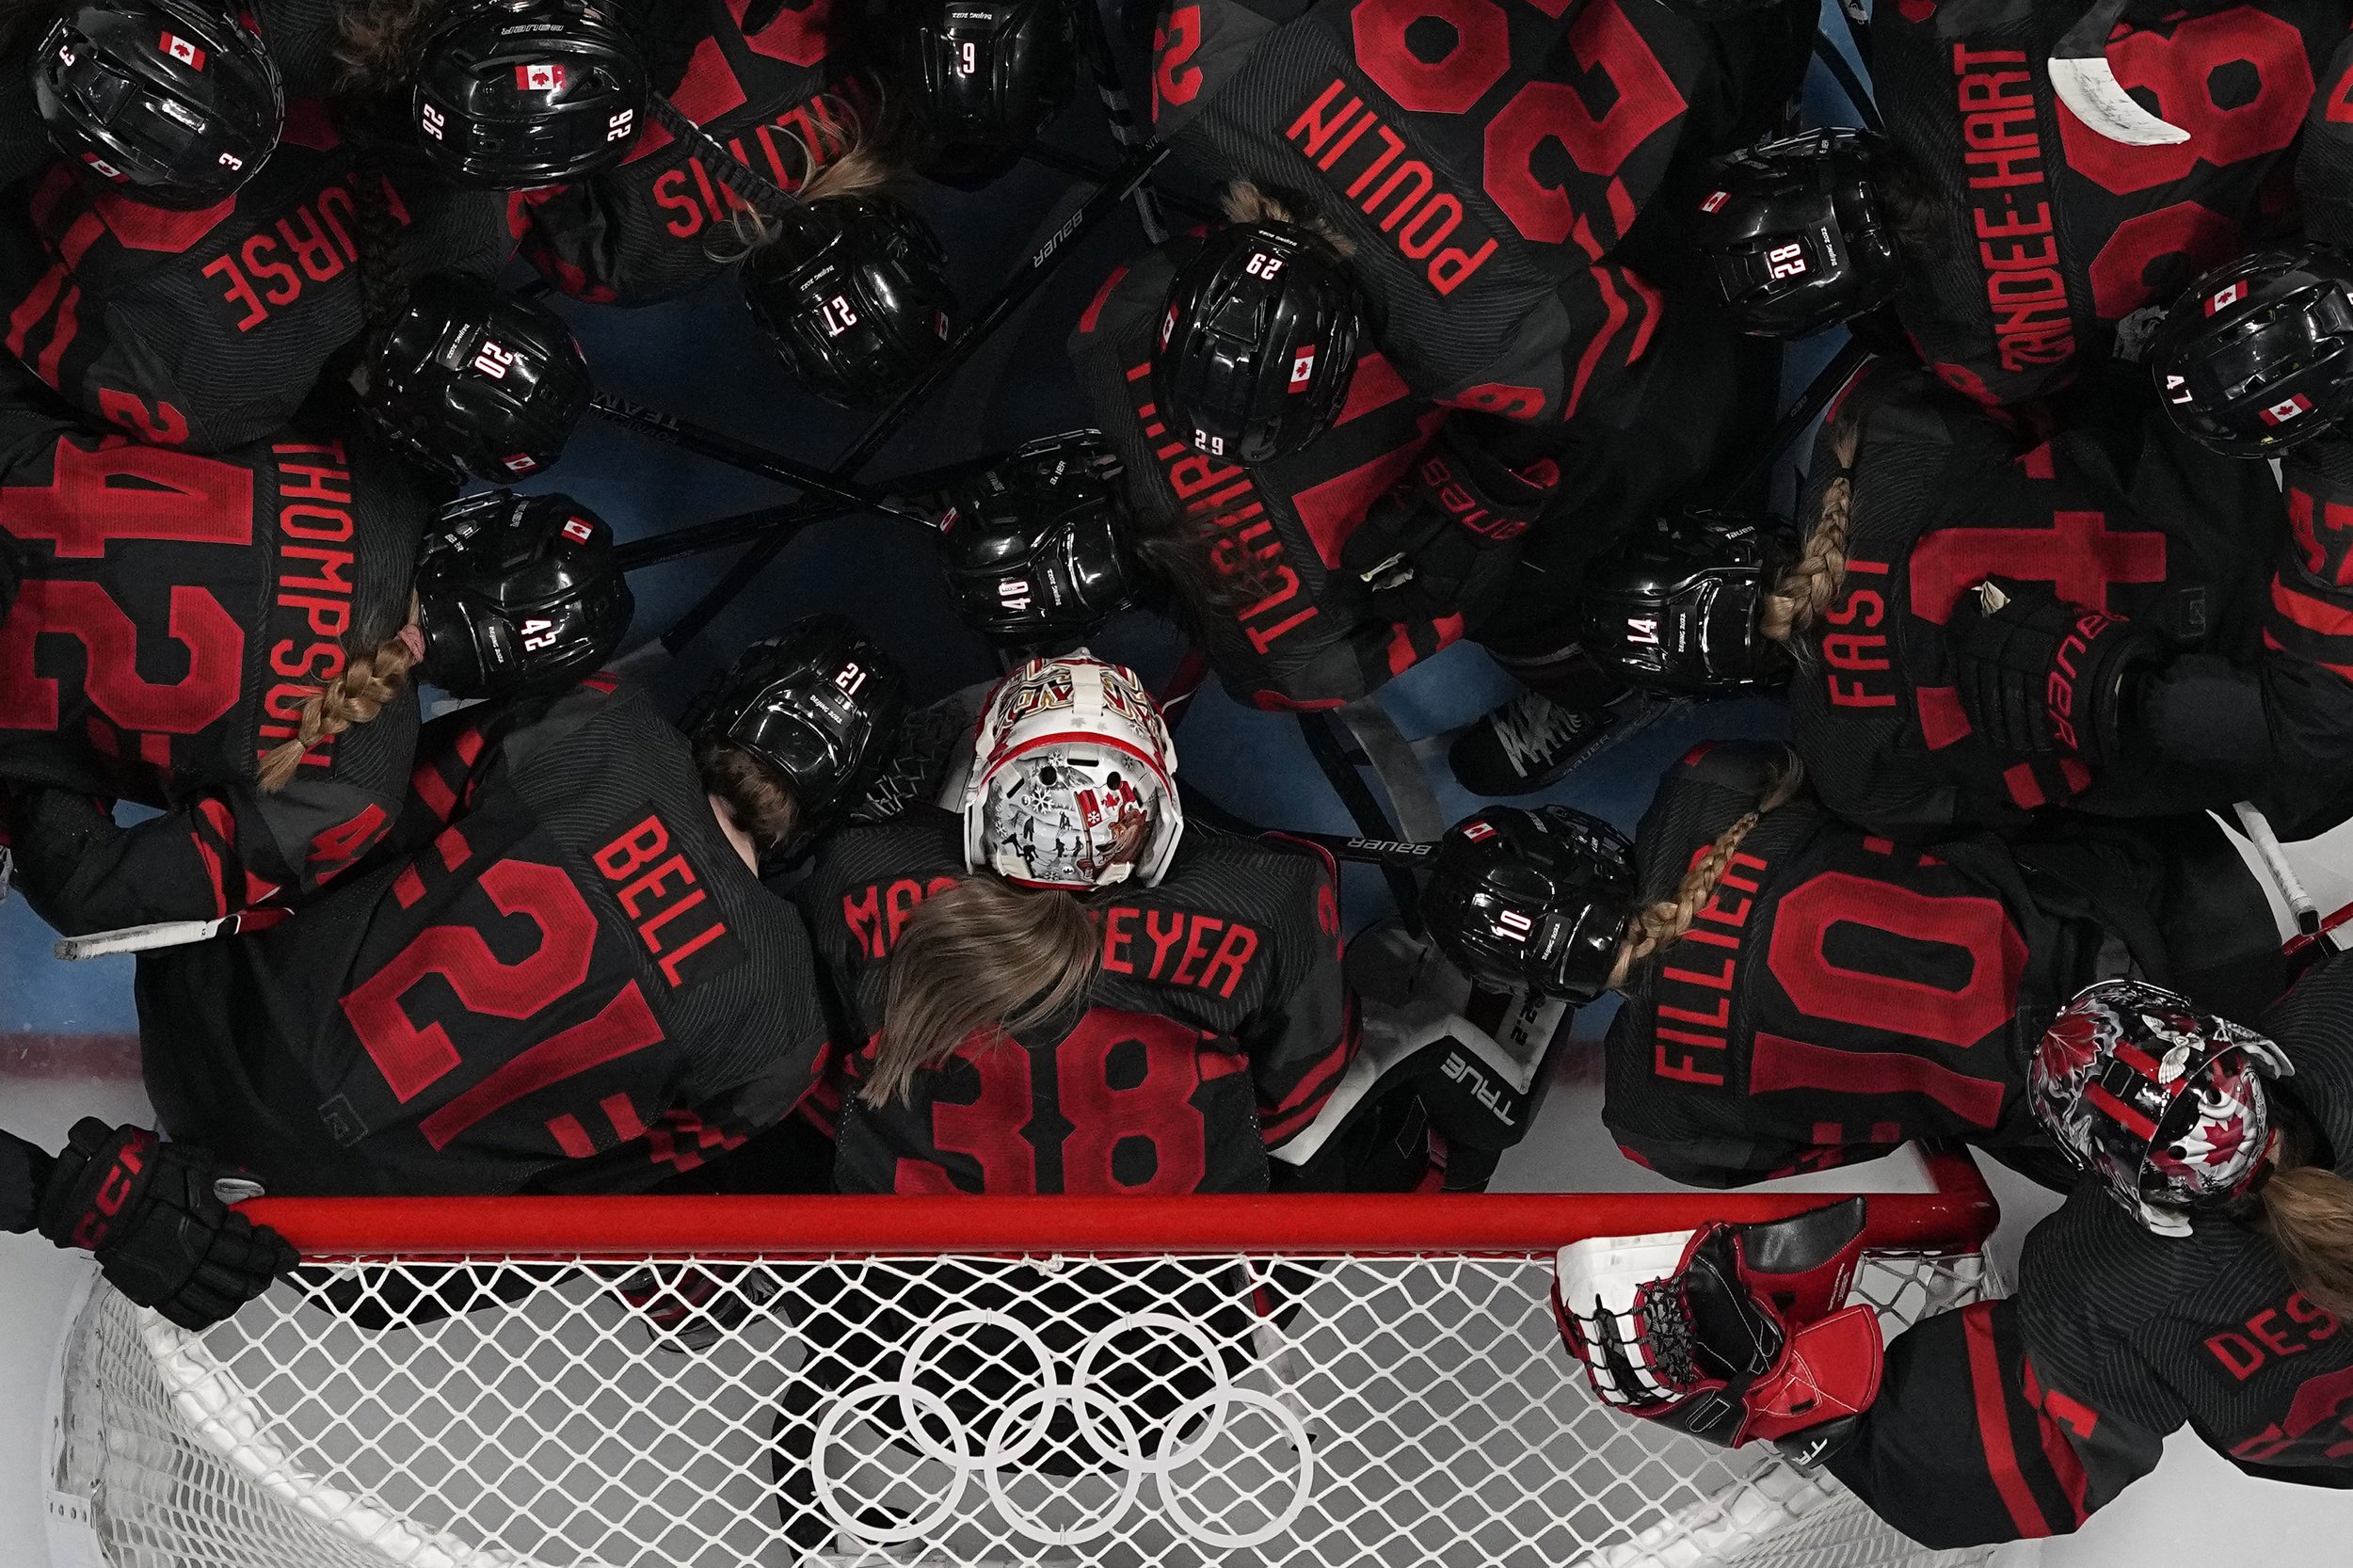  Canada's players huddle prior a women's quarterfinal hockey game between Canada and Sweden at the 2022 Winter Olympics, Friday, Feb. 11, 2022, in Beijing. (AP Photo/Petr David Josek) 